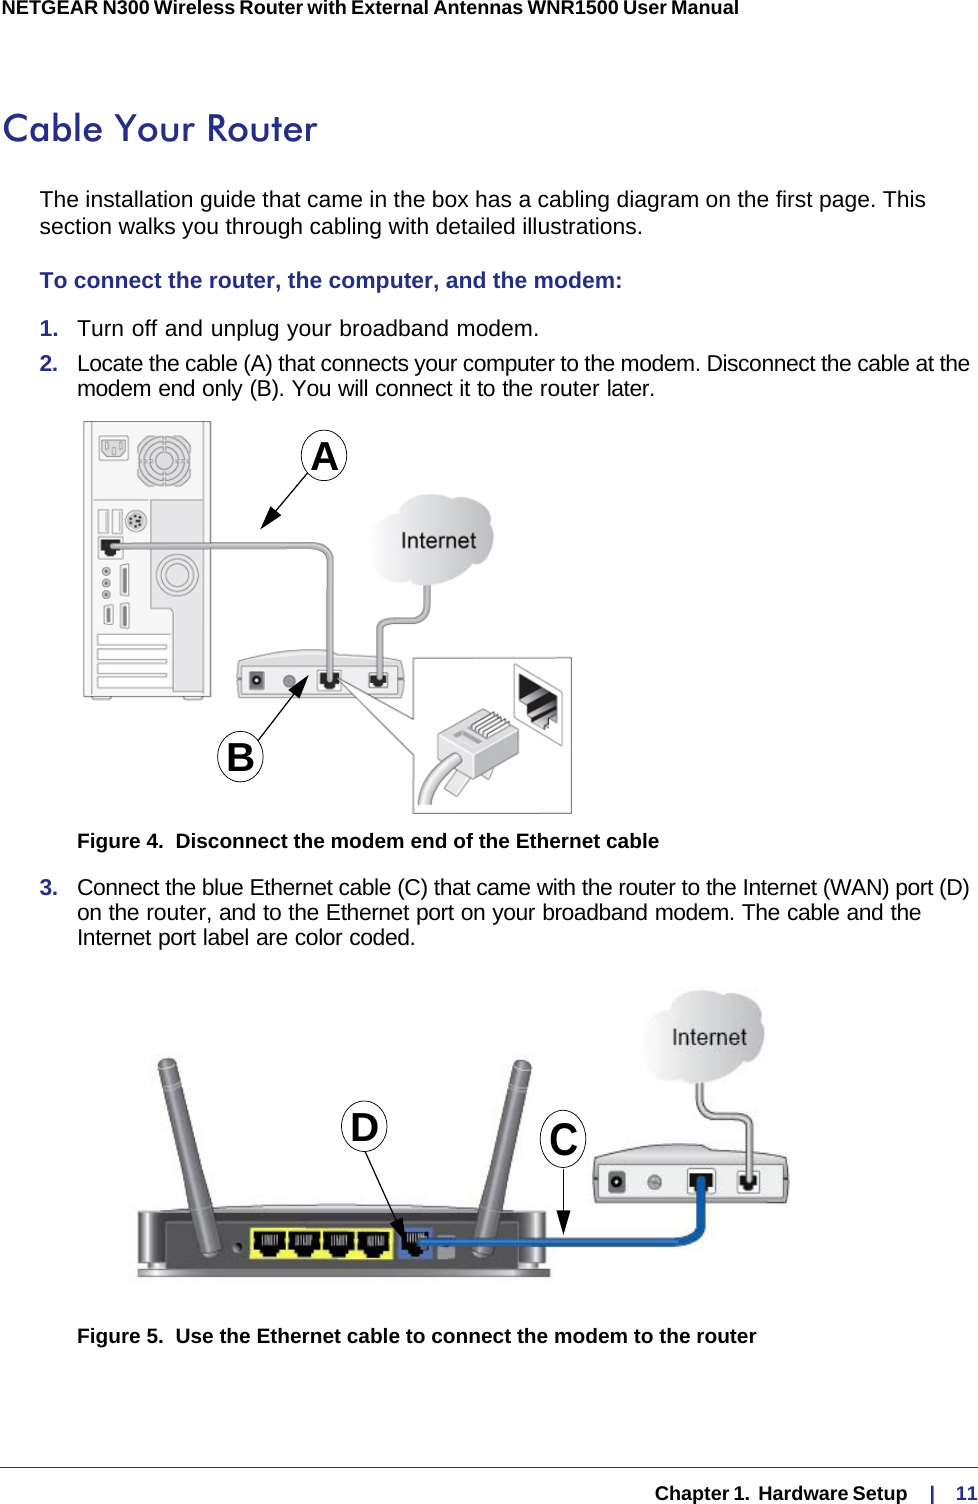   Chapter 1.  Hardware Setup     |    11NETGEAR N300 Wireless Router with External Antennas WNR1500 User Manual Cable Your RouterThe installation guide that came in the box has a cabling diagram on the first page. This section walks you through cabling with detailed illustrations.To connect the router, the computer, and the modem:1.  Turn off and unplug your broadband modem.2.  Locate the cable (A) that connects your computer to the modem. Disconnect the cable at the modem end only (B). You will connect it to the router later.ABFigure 4.  Disconnect the modem end of the Ethernet cable3.  Connect the blue Ethernet cable (C) that came with the router to the Internet (WAN) port (D) on the router, and to the Ethernet port on your broadband modem. The cable and the Internet port label are color coded.CDFigure 5.  Use the Ethernet cable to connect the modem to the router